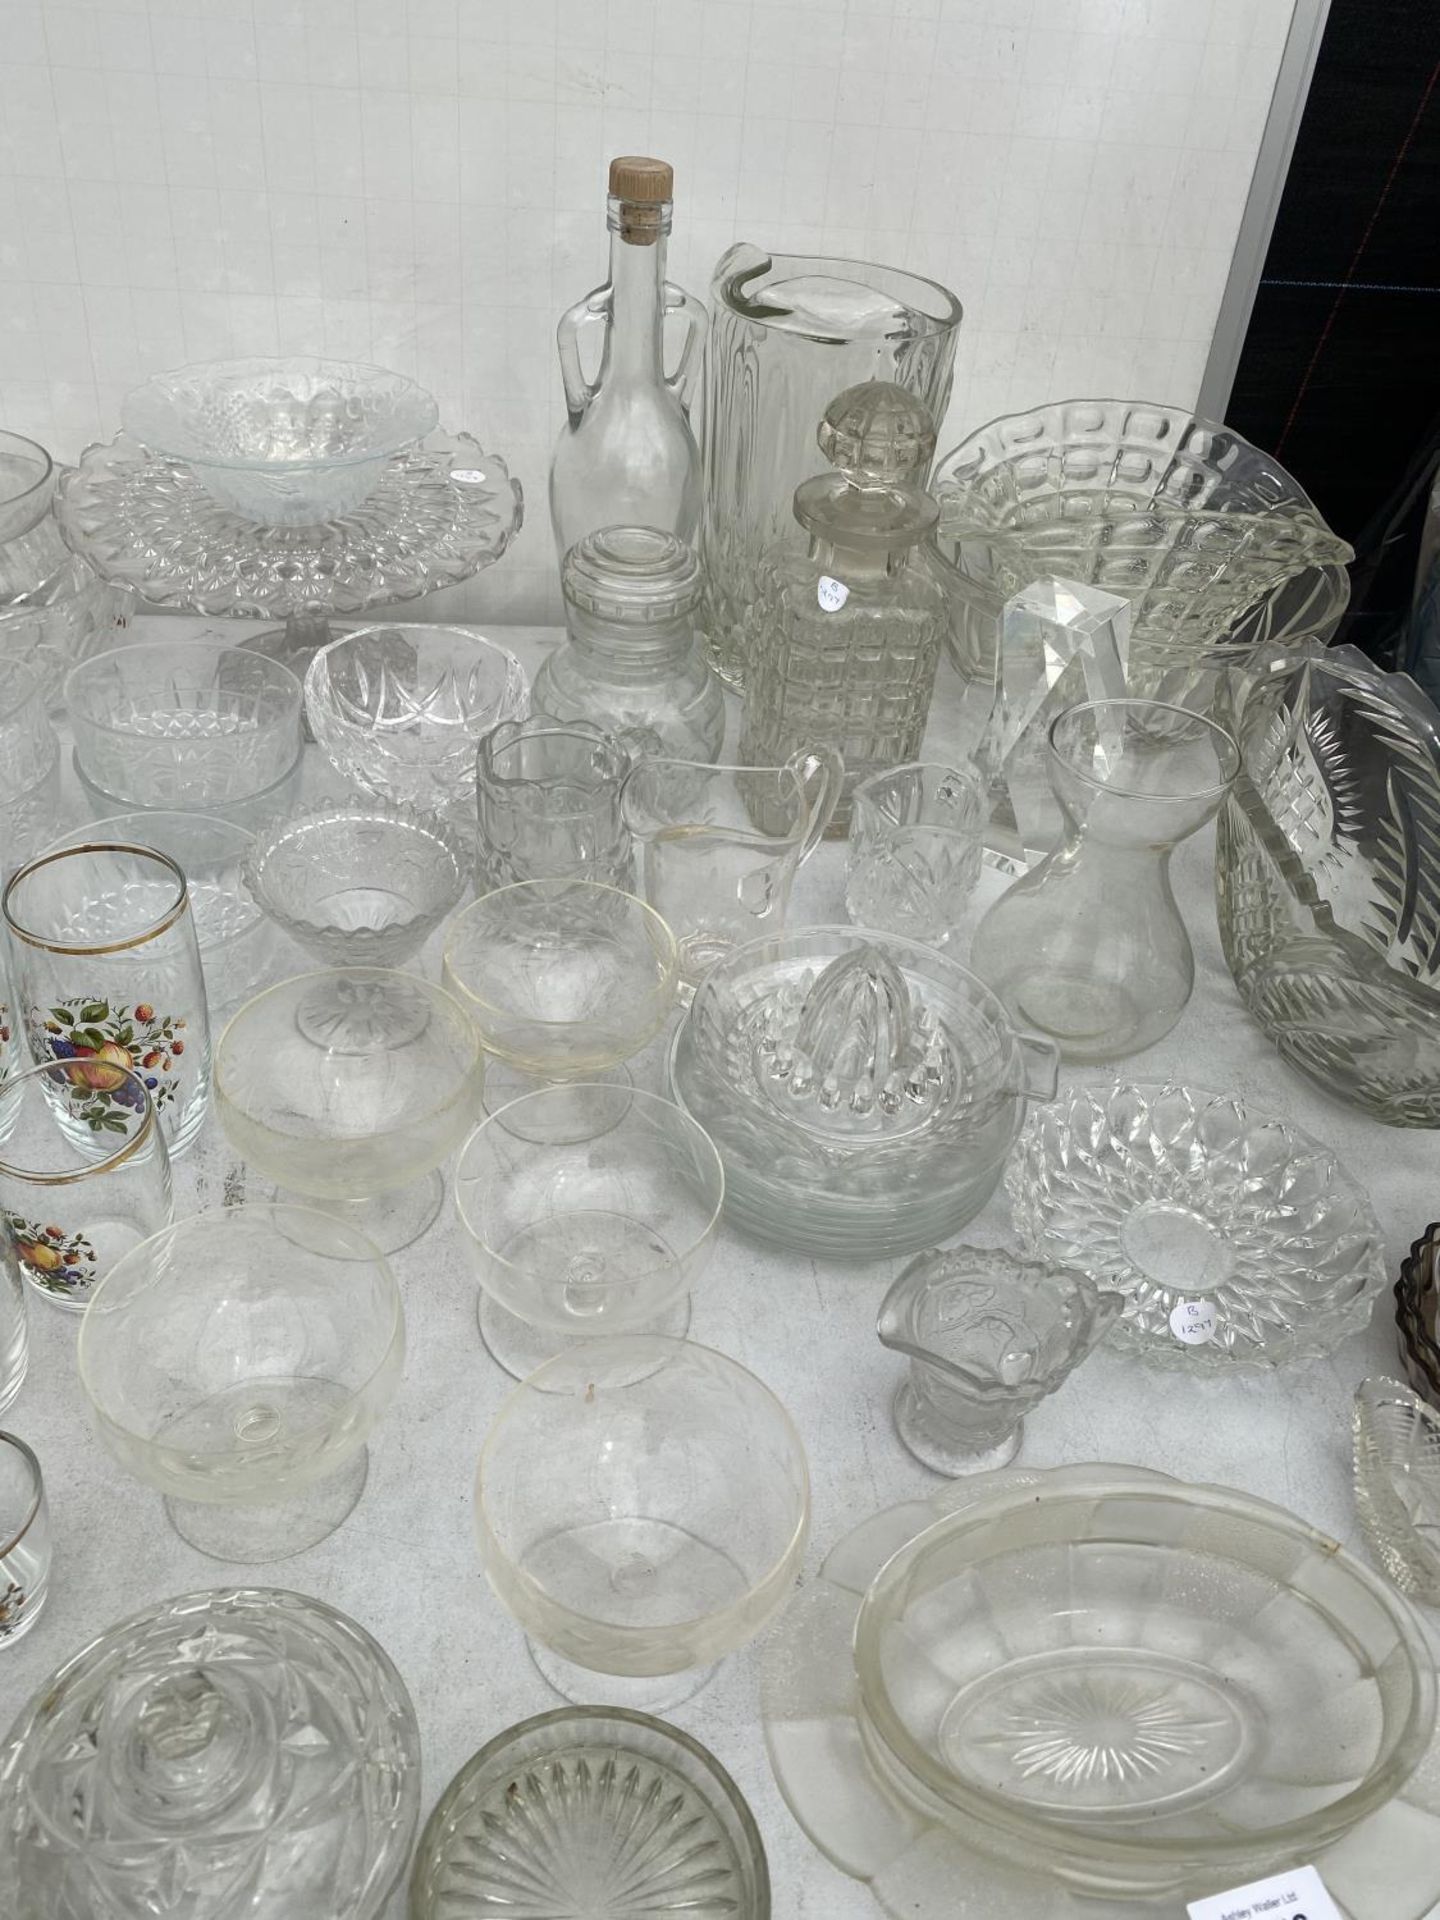 A LARGE ASSORTMENT OF GLASS WARE TO INCLUDE DECANTOR, BOWLS AND TUMBLERS ETC - Image 4 of 4